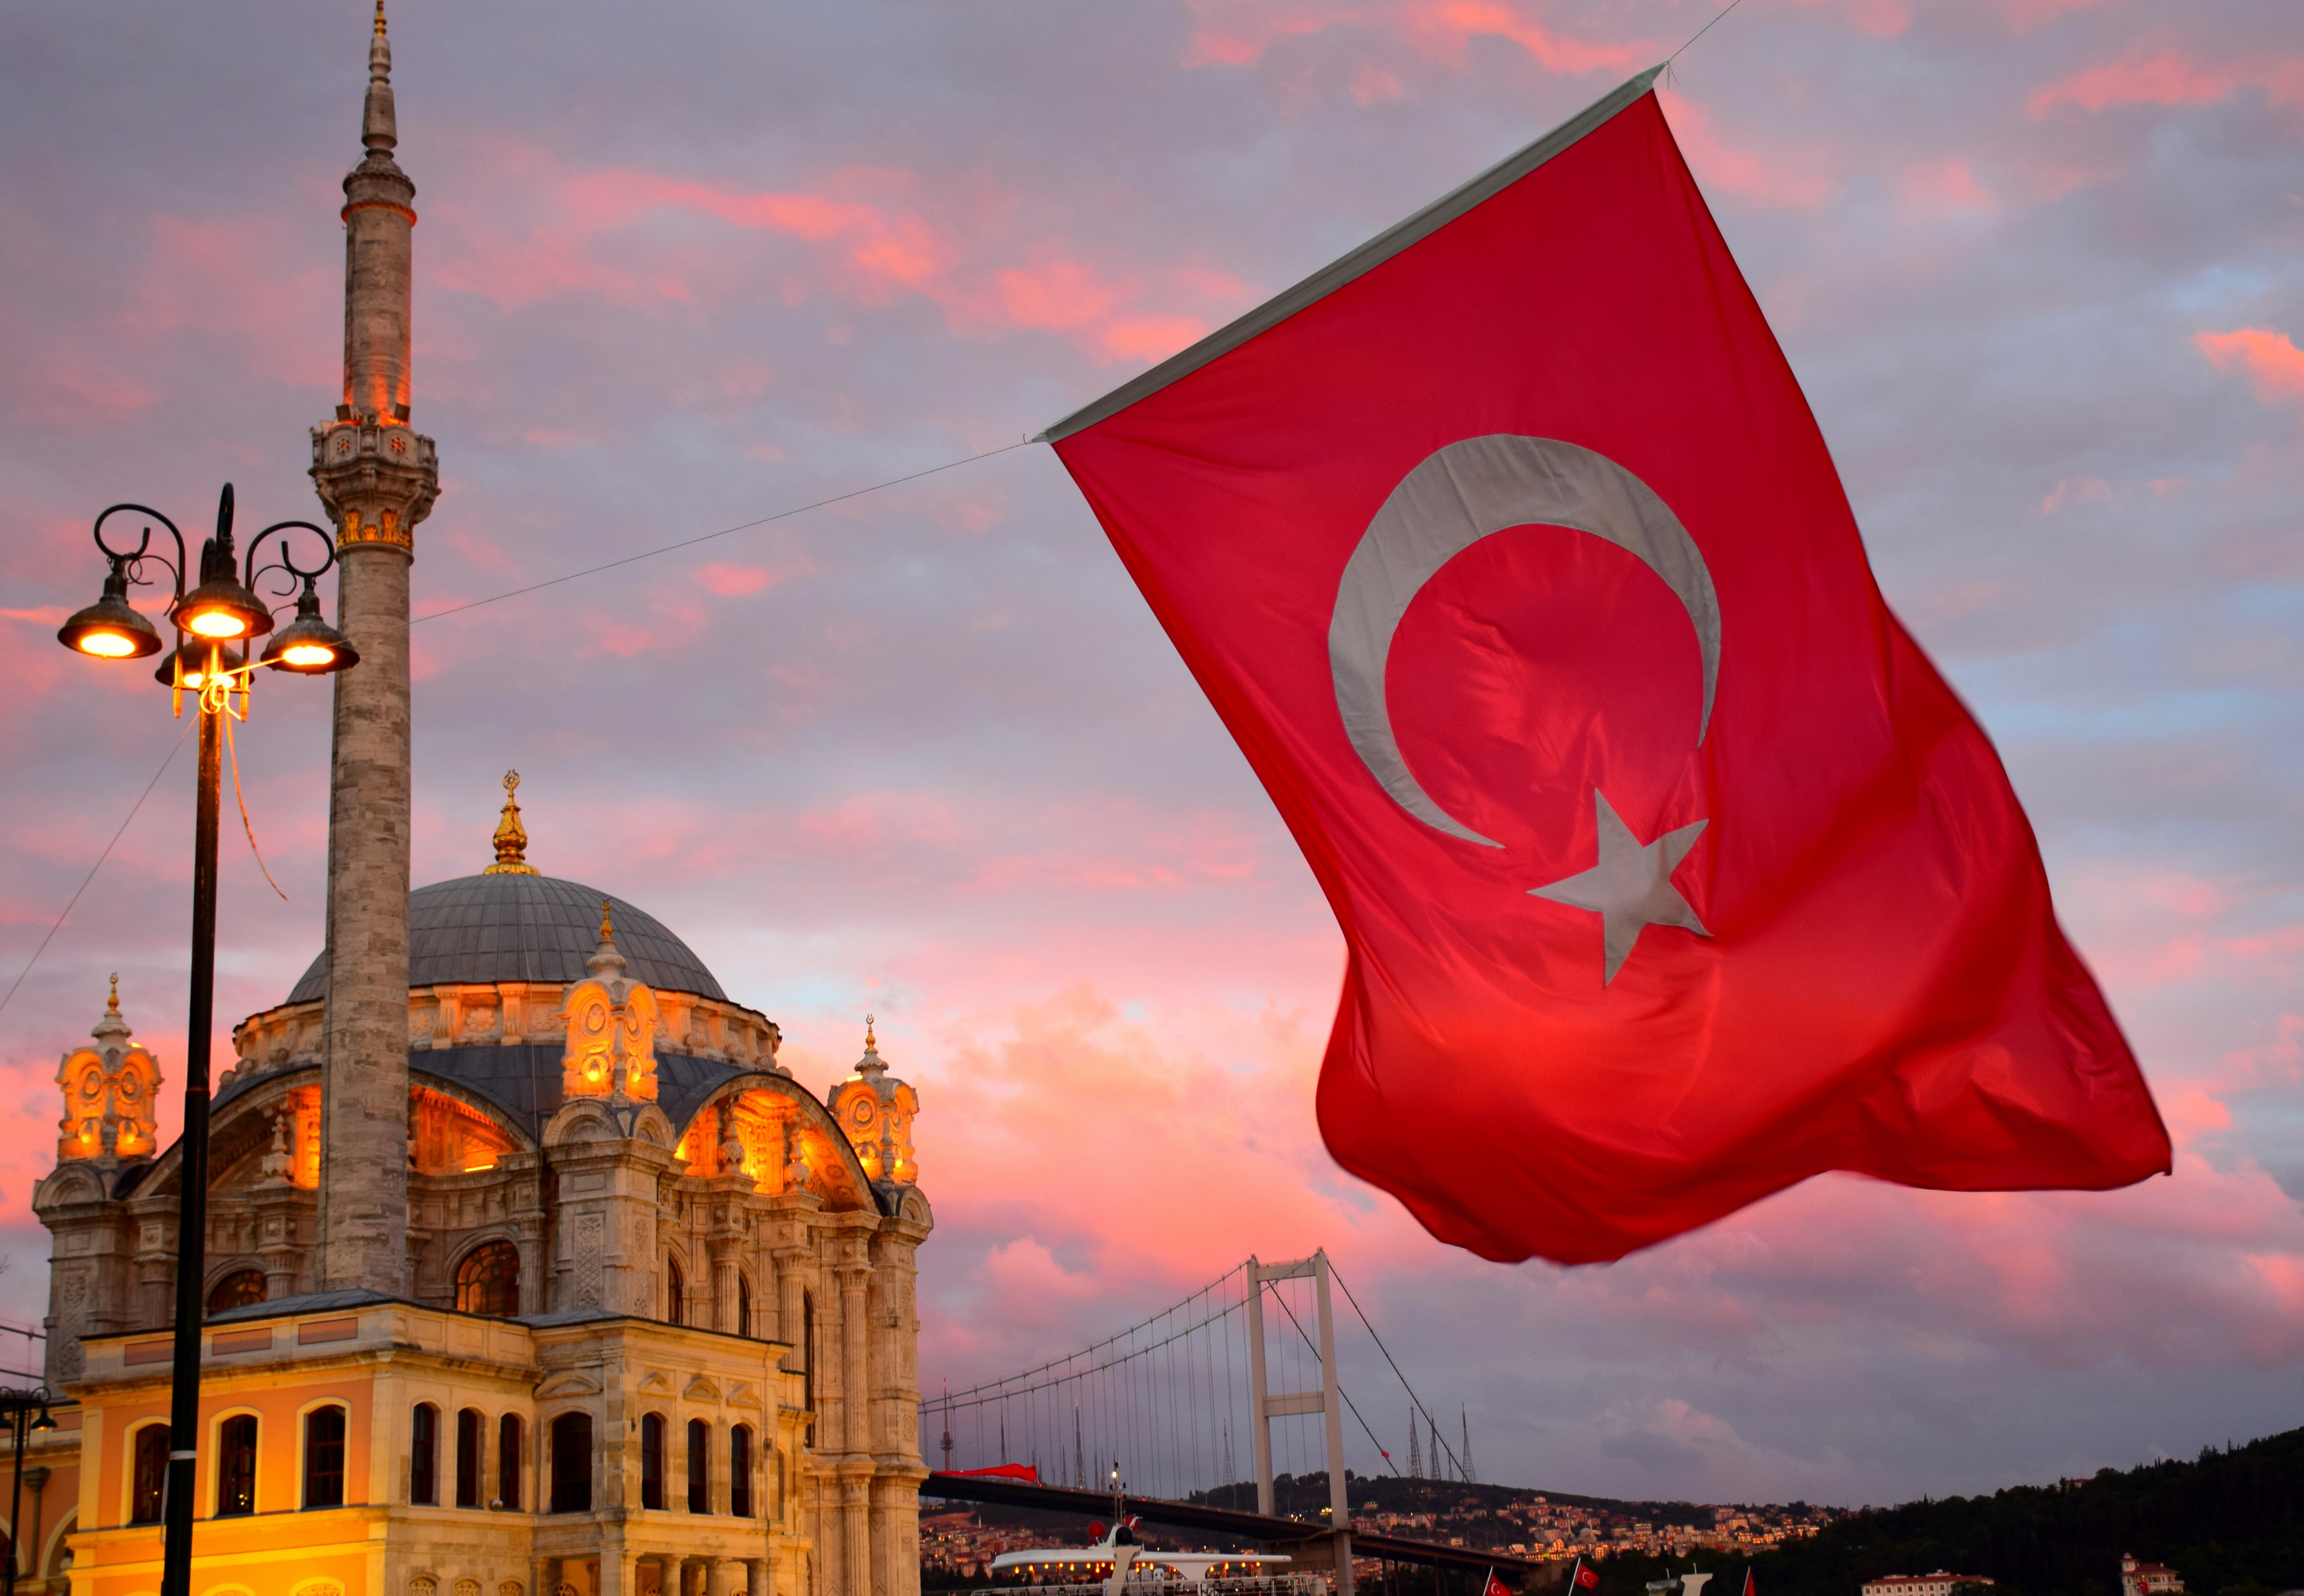 Turkey's ambitions for Greater Turkey